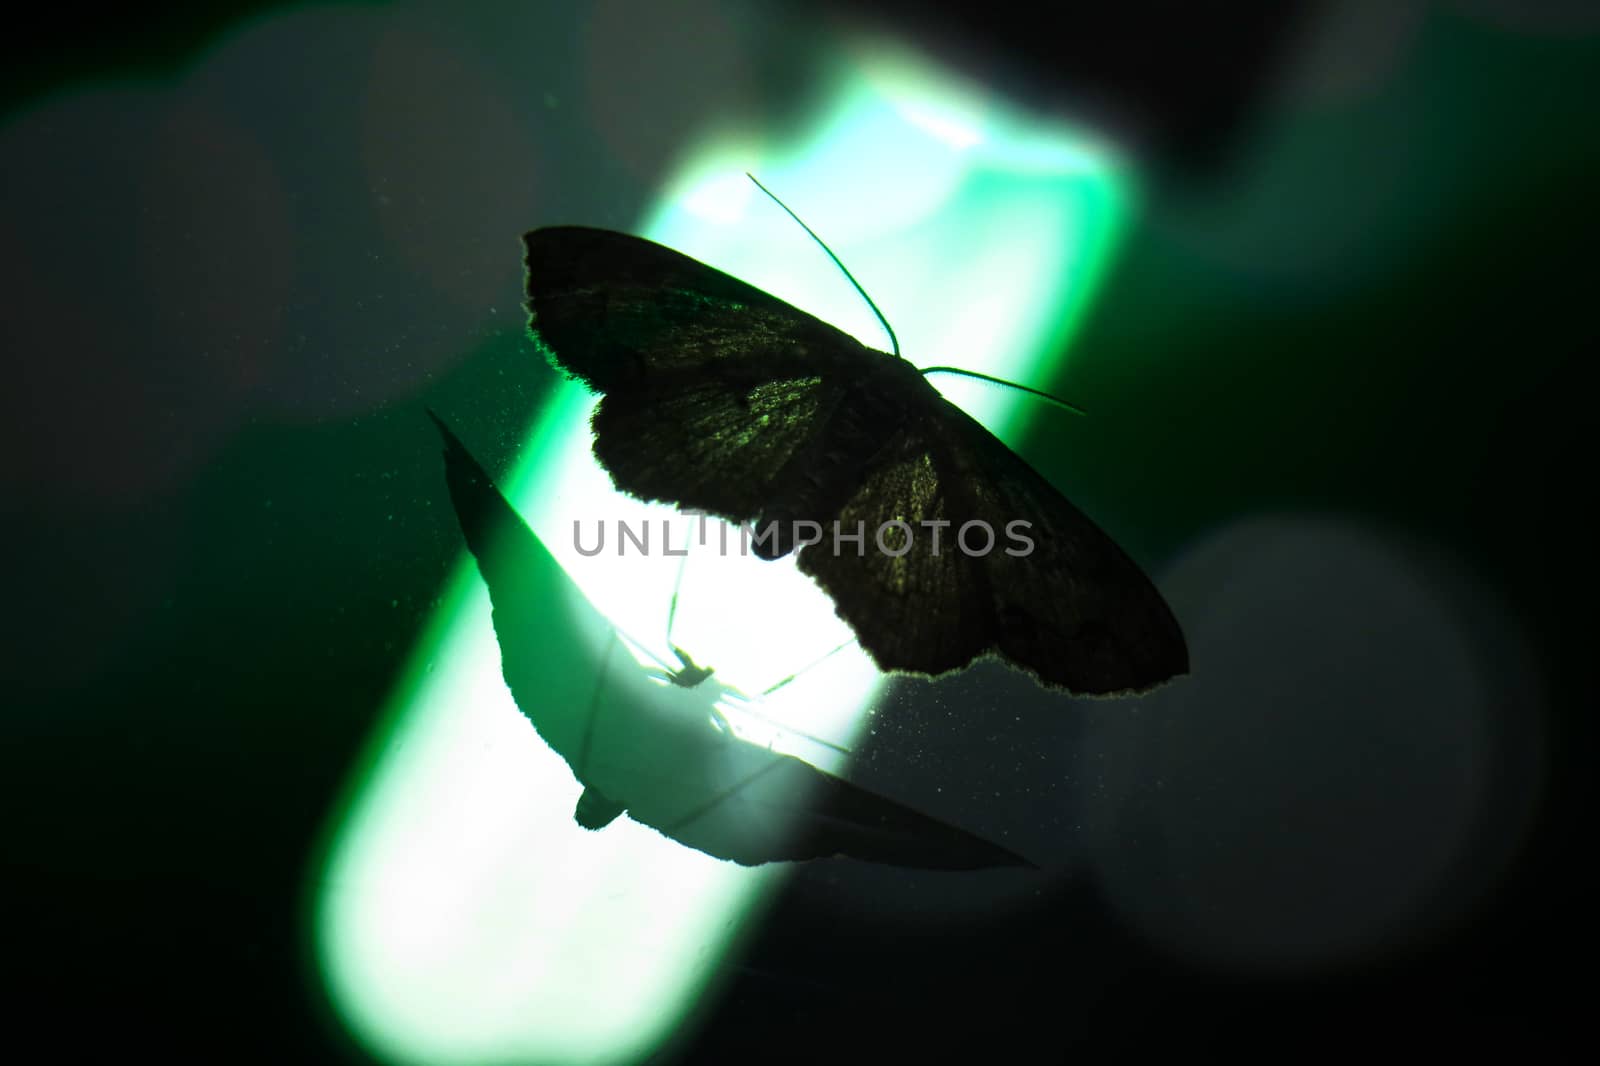 A moth with its reflection on a mirror with a green light in the background.